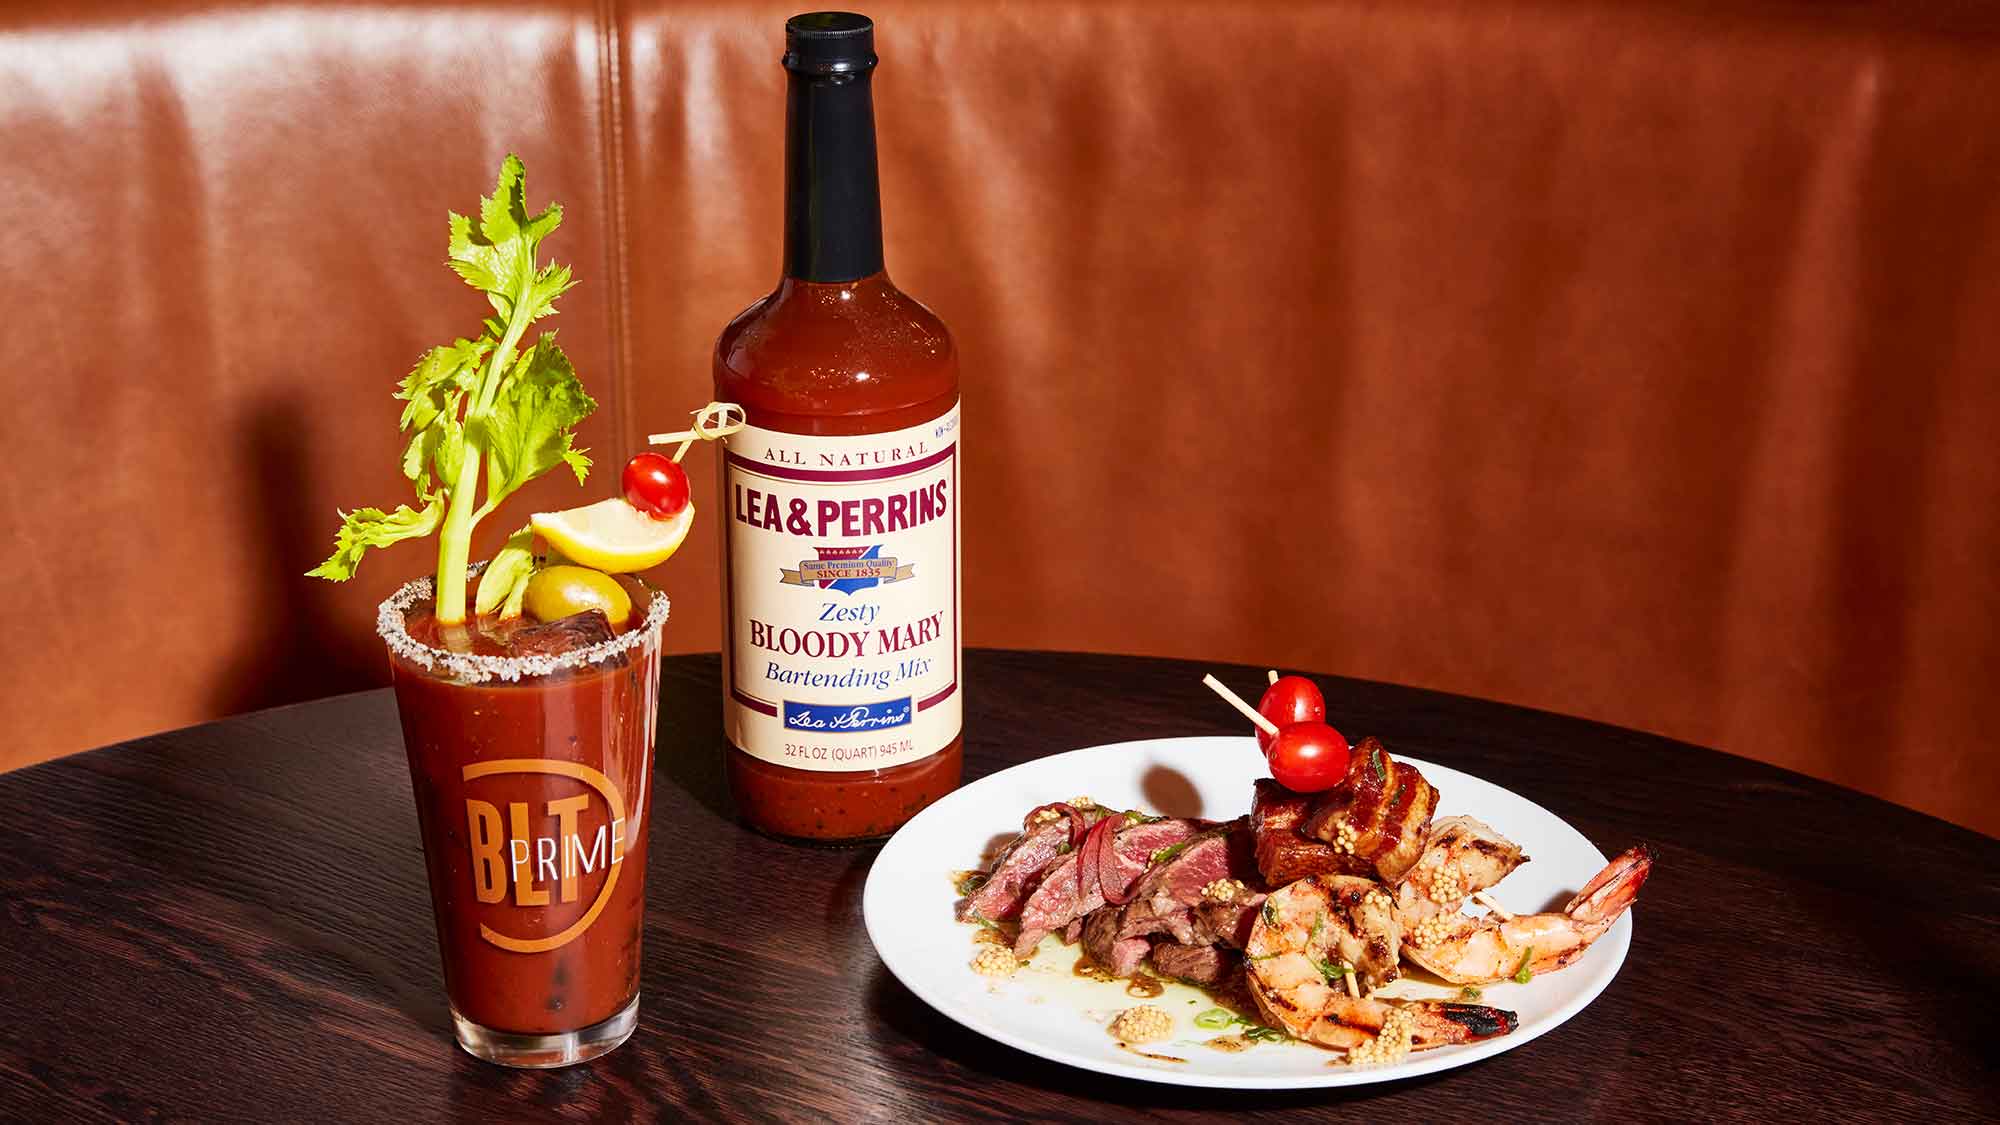 Lea & Perrins, Inventor of Worcestershire Sauce, Launches First Innovation in Over a Decade with New Ready To Drink Bloody Mary Mix